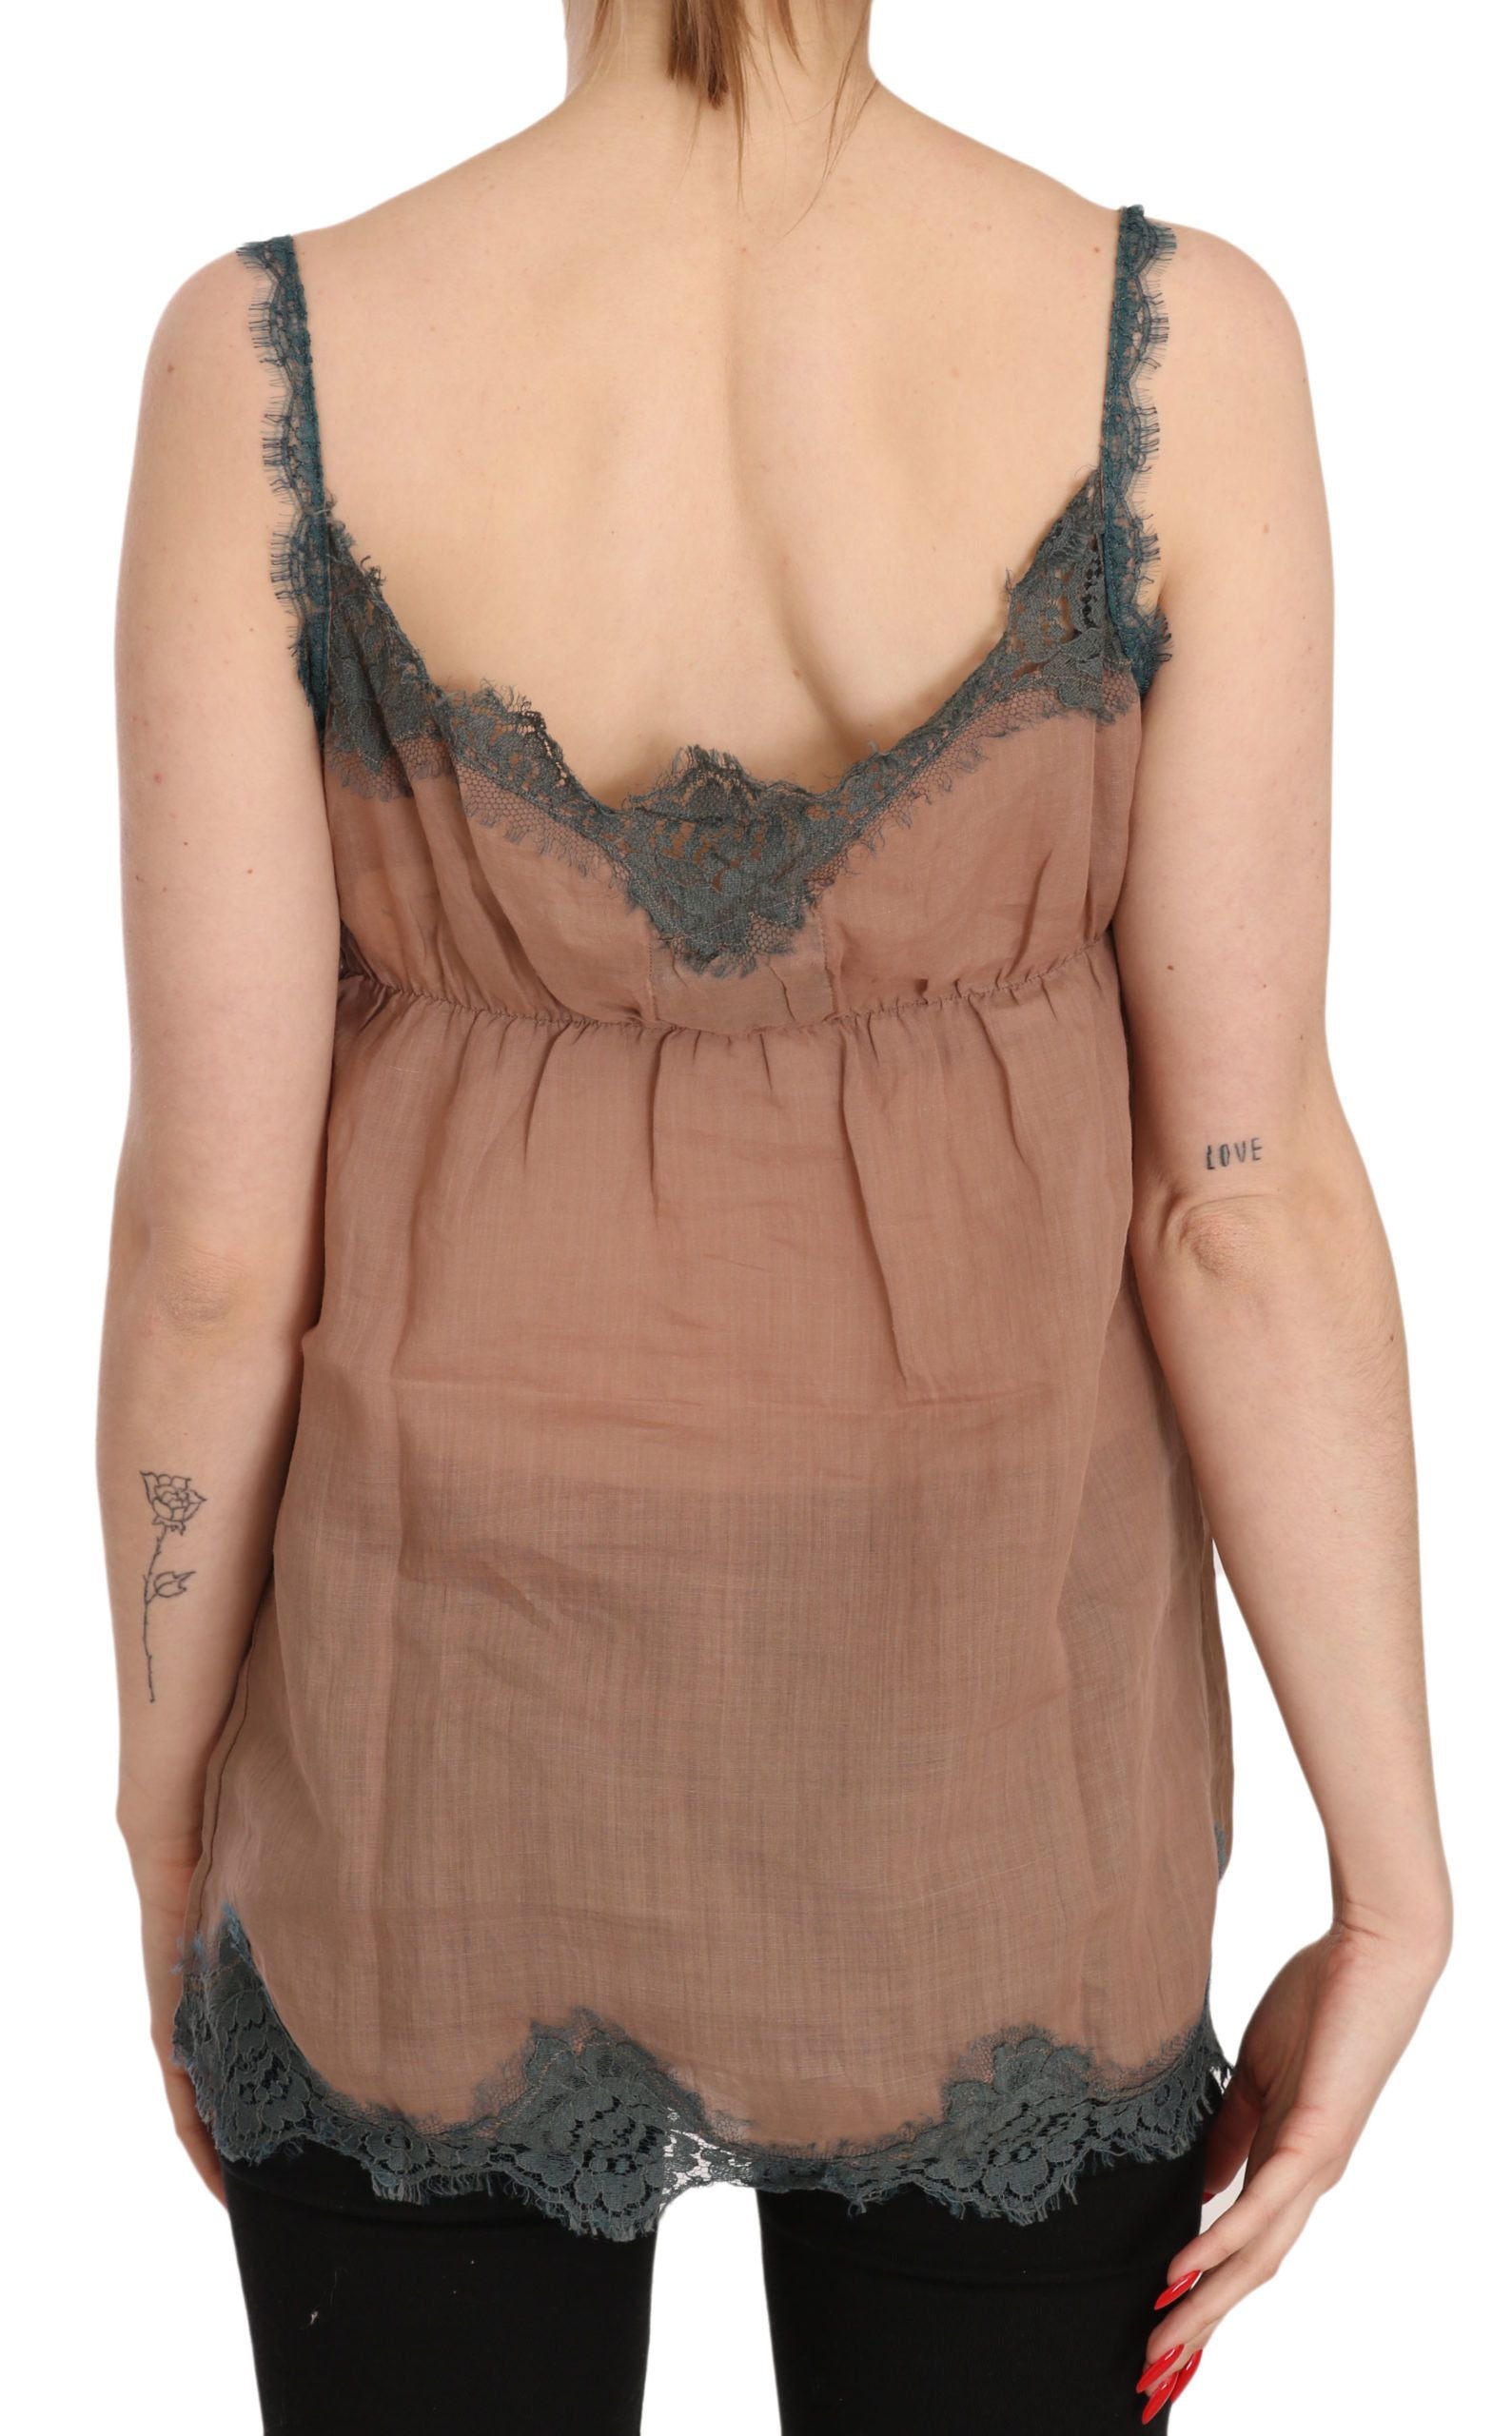 Brown Lace Spaghetti Strap Tank Top Blouse - Designed by PINK MEMORIES Available to Buy at a Discounted Price on Moon Behind The Hill Online Designer Discount Store